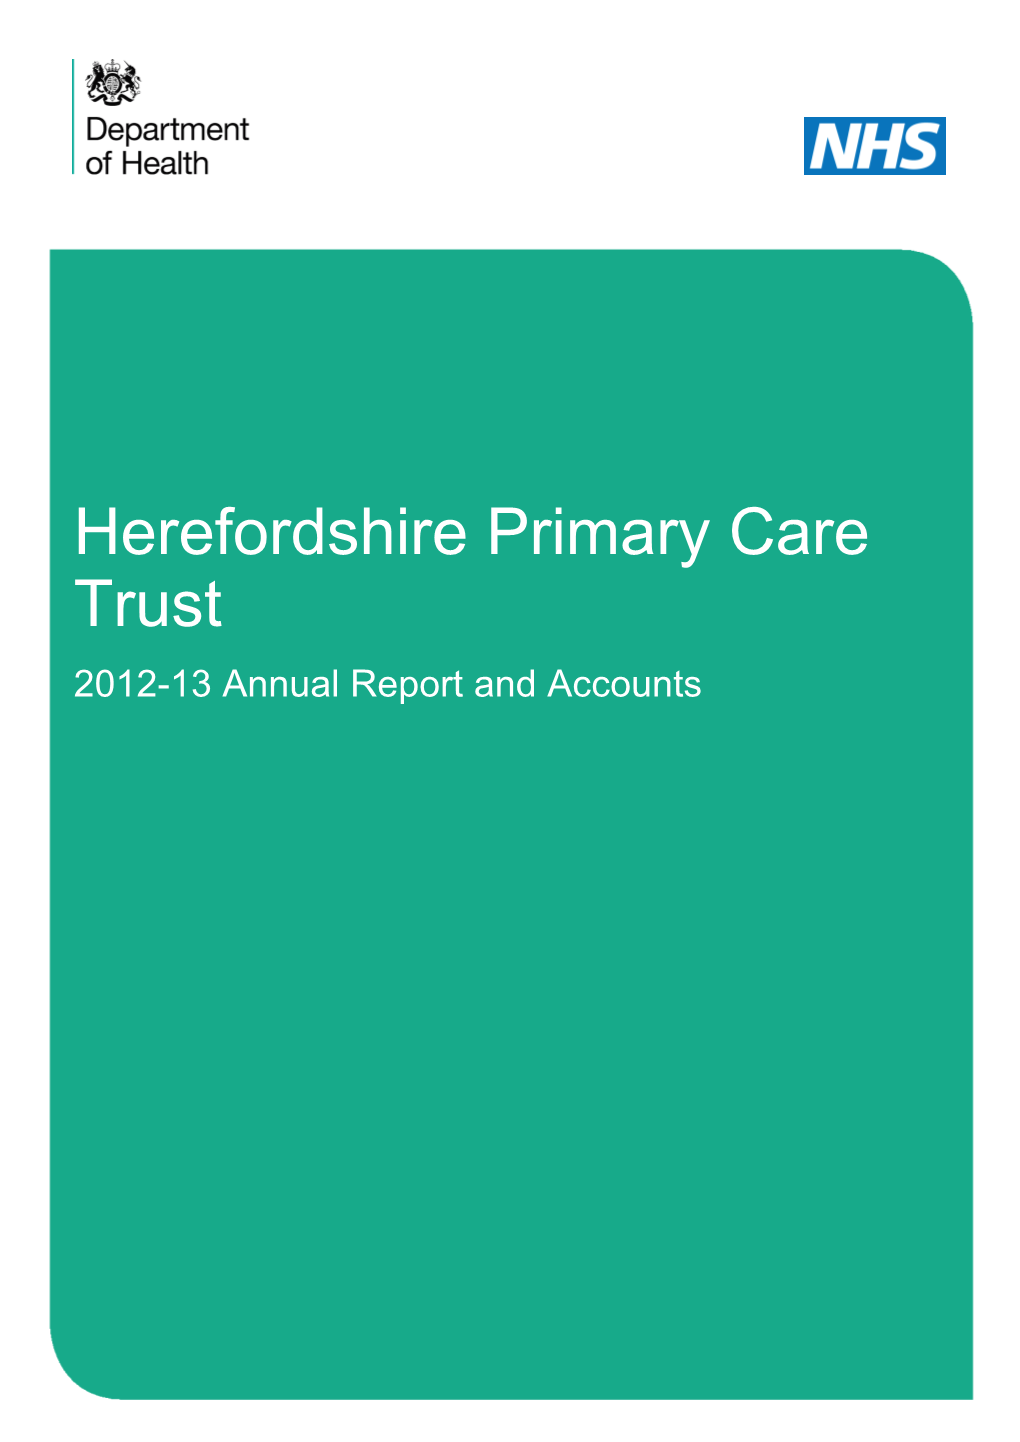 Herefordshire Primary Care Trust 2012-13 Annual Report and Accounts